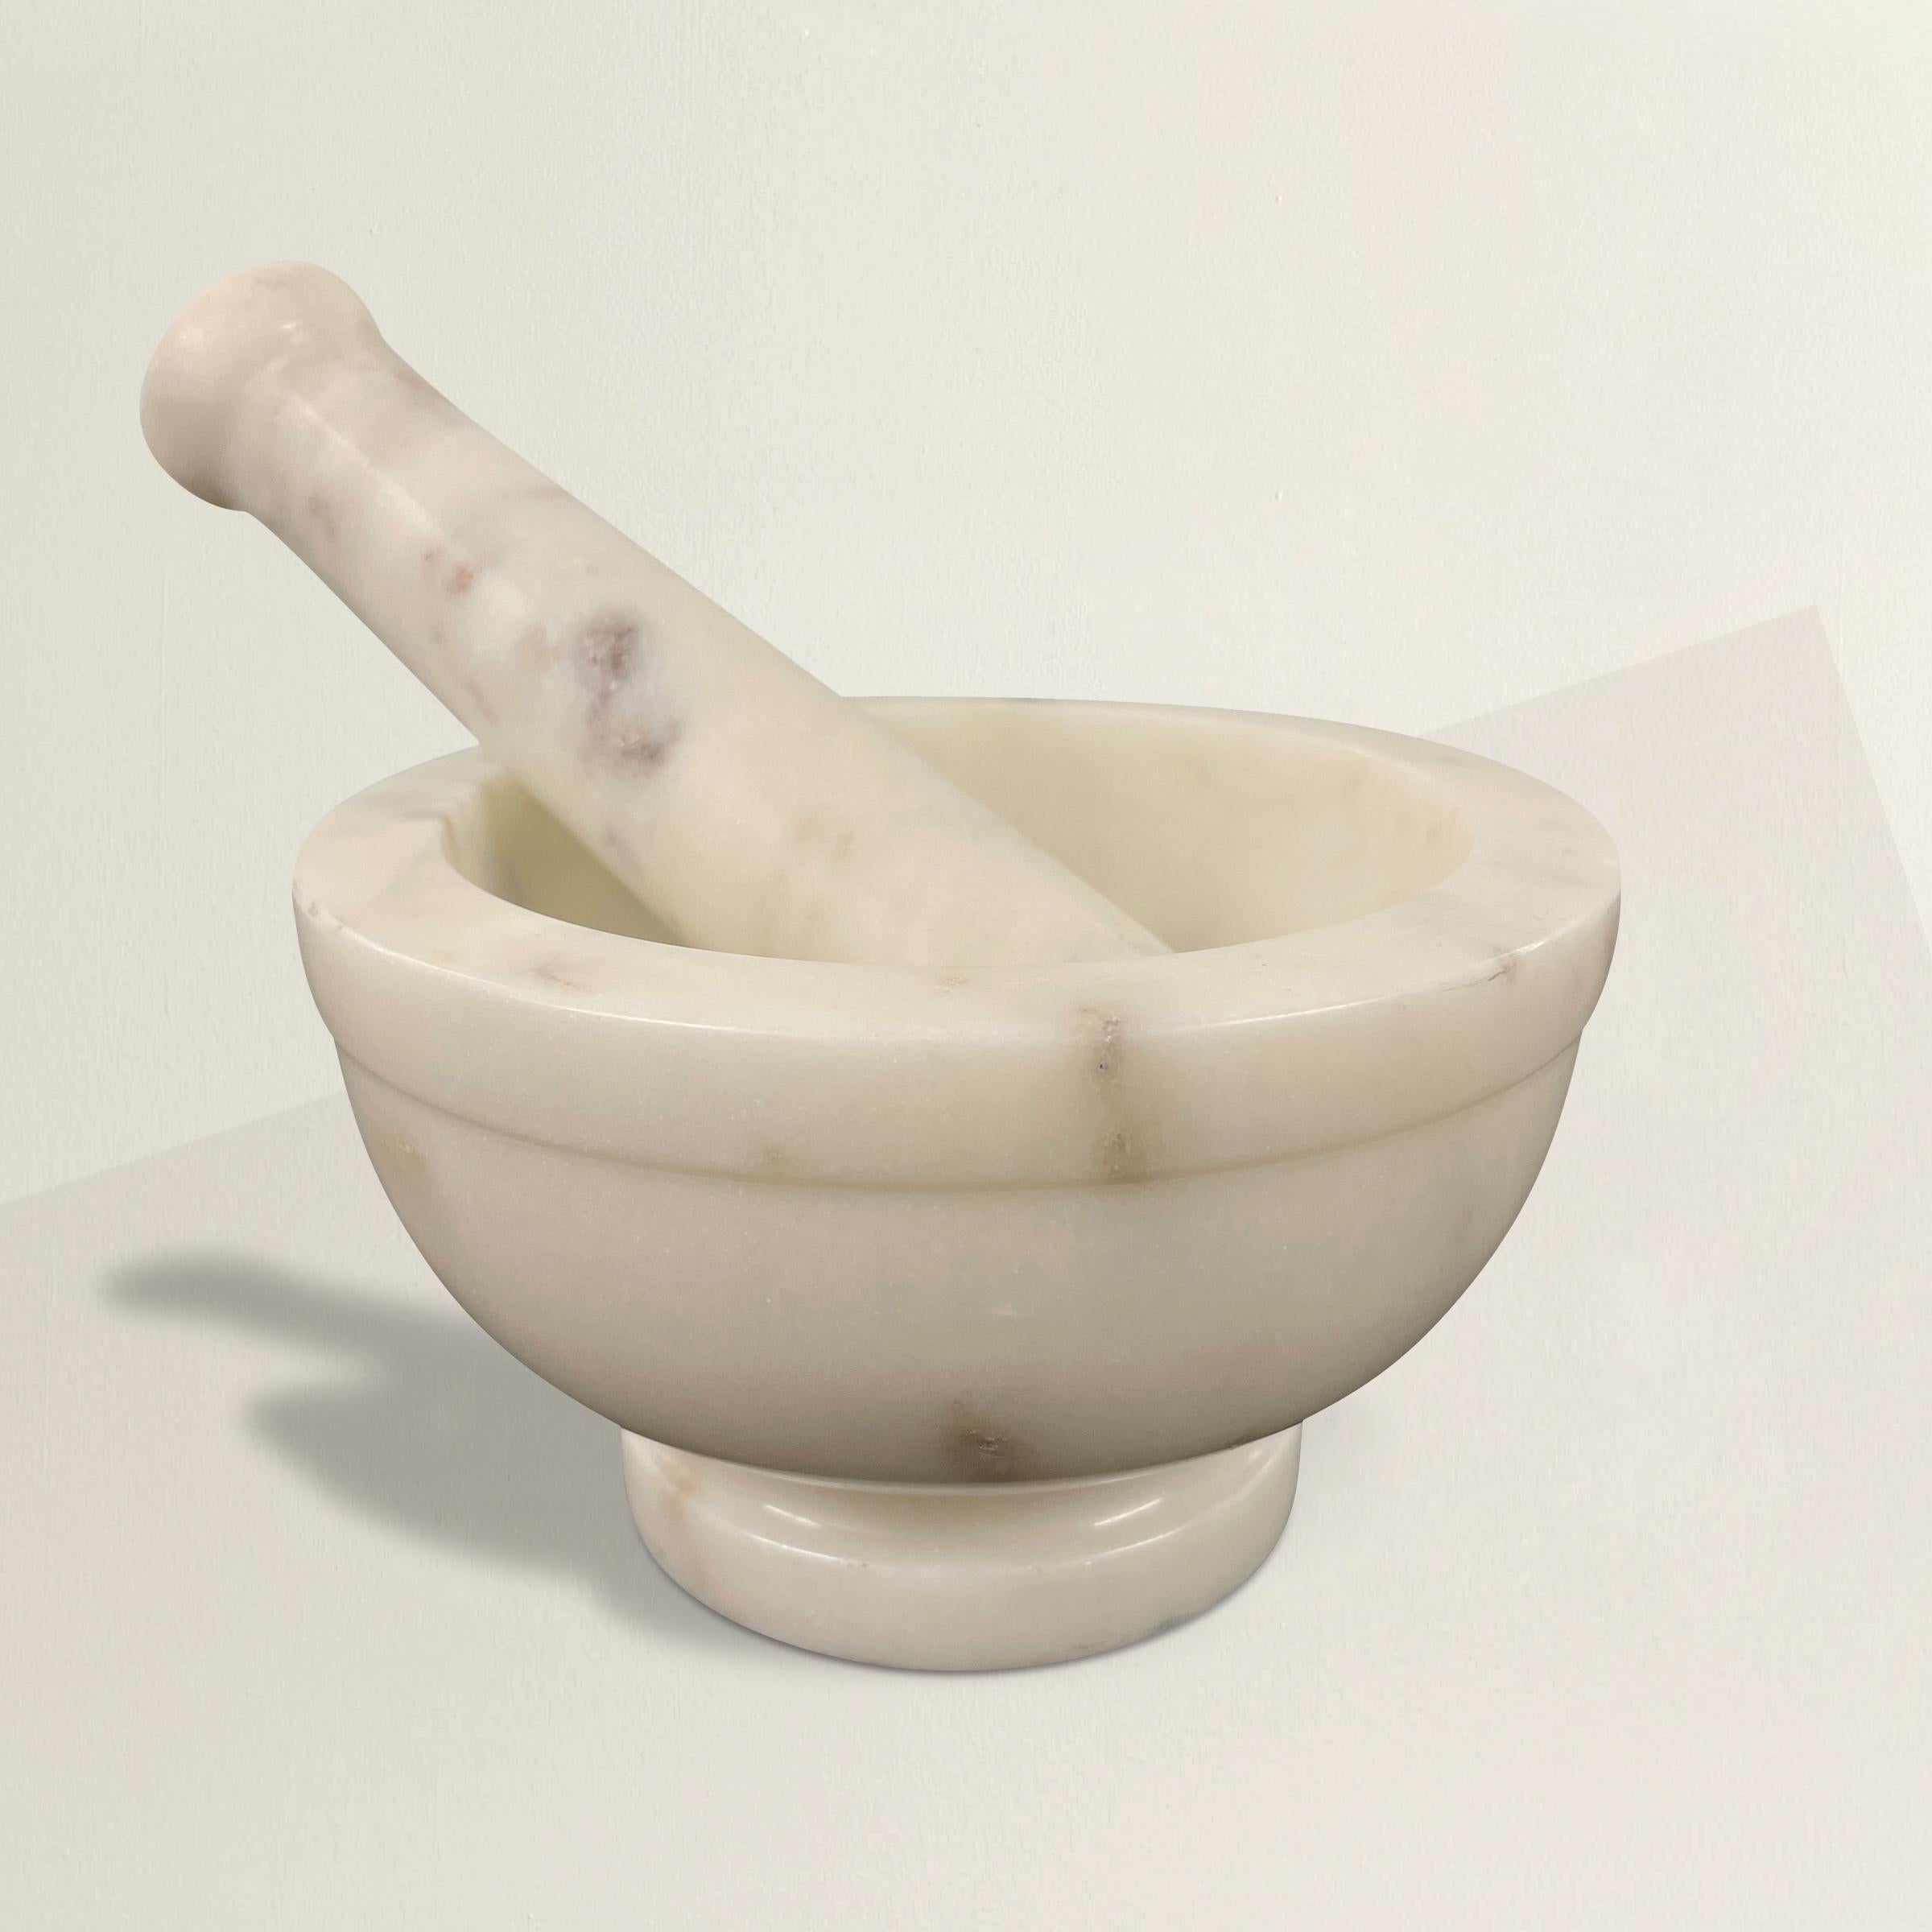 A chic marble mortar with a marble pestle, big enough to crush even the largest of spices, but small enough to keep on your kitchen counter and filled with salt or pepper so it's always on hand.